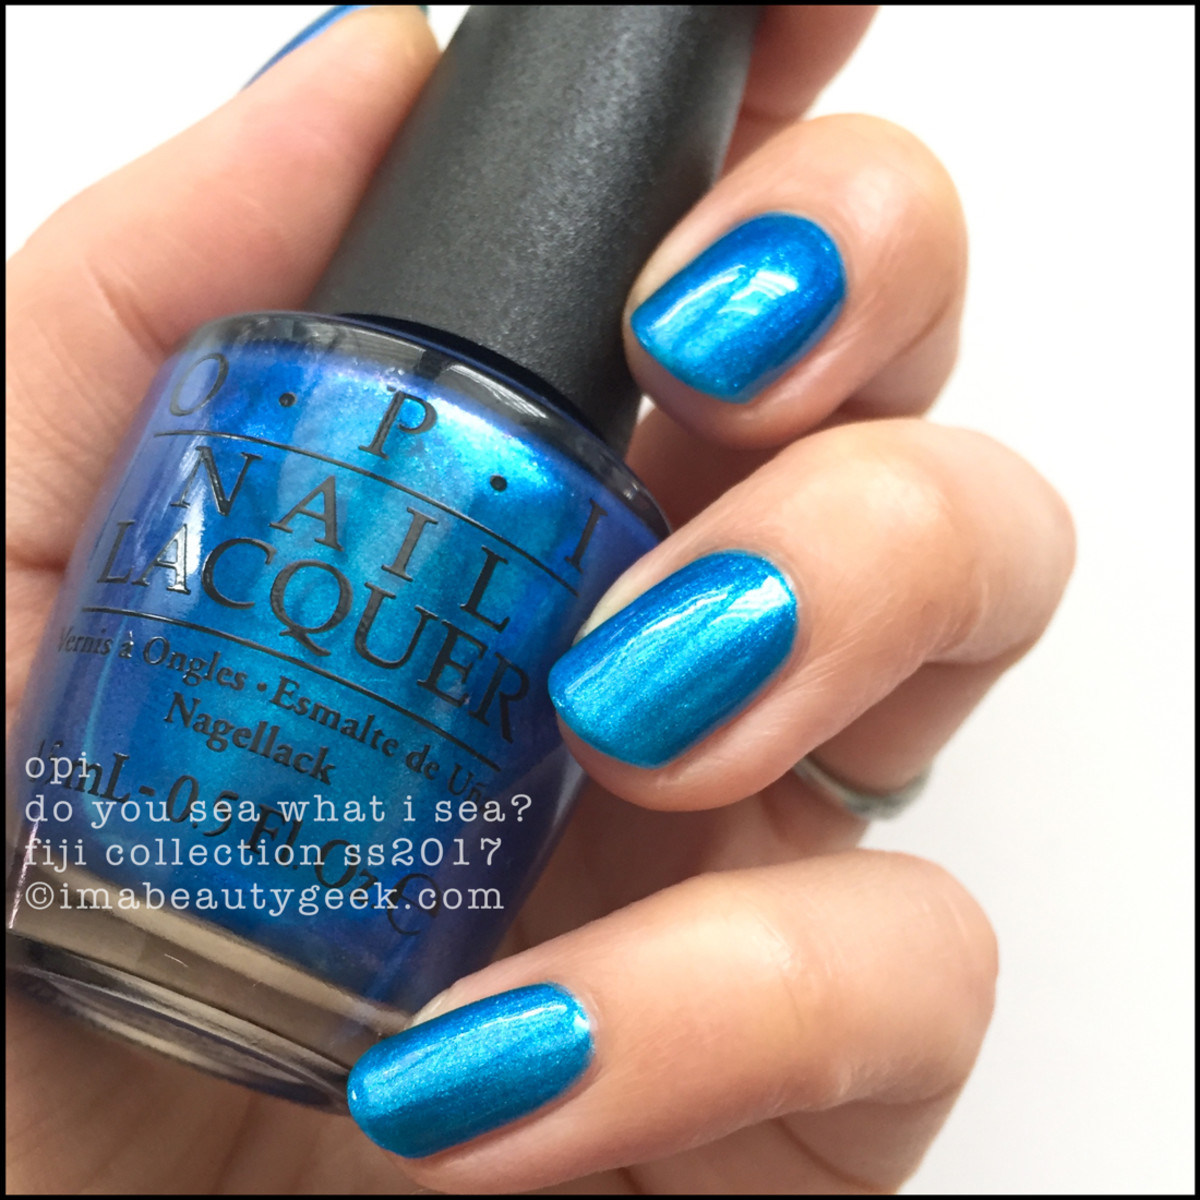 OPI Do You Sea What I Sea?_OPI Fiji Collection Swatches Review 2017